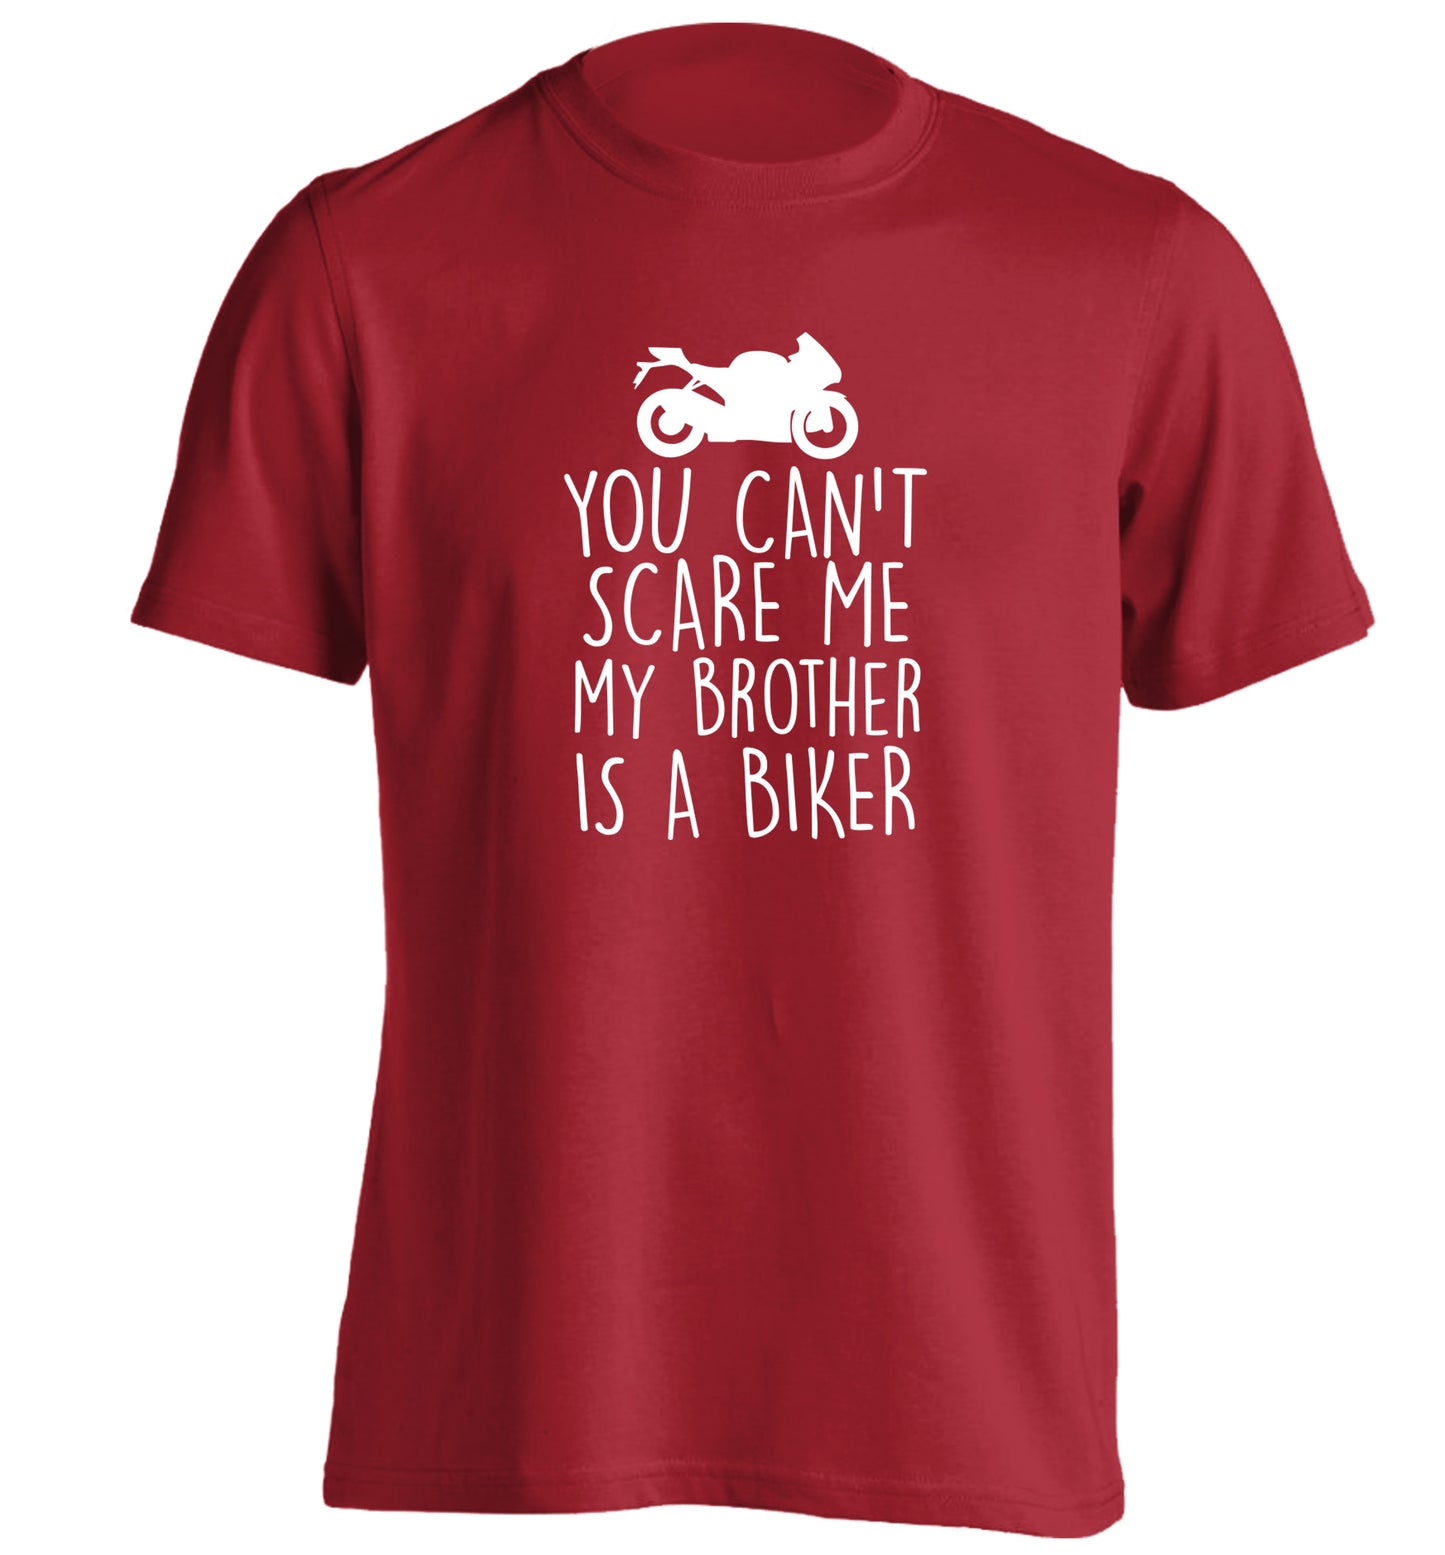 You can't scare me my brother is a biker adults unisex red Tshirt 2XL